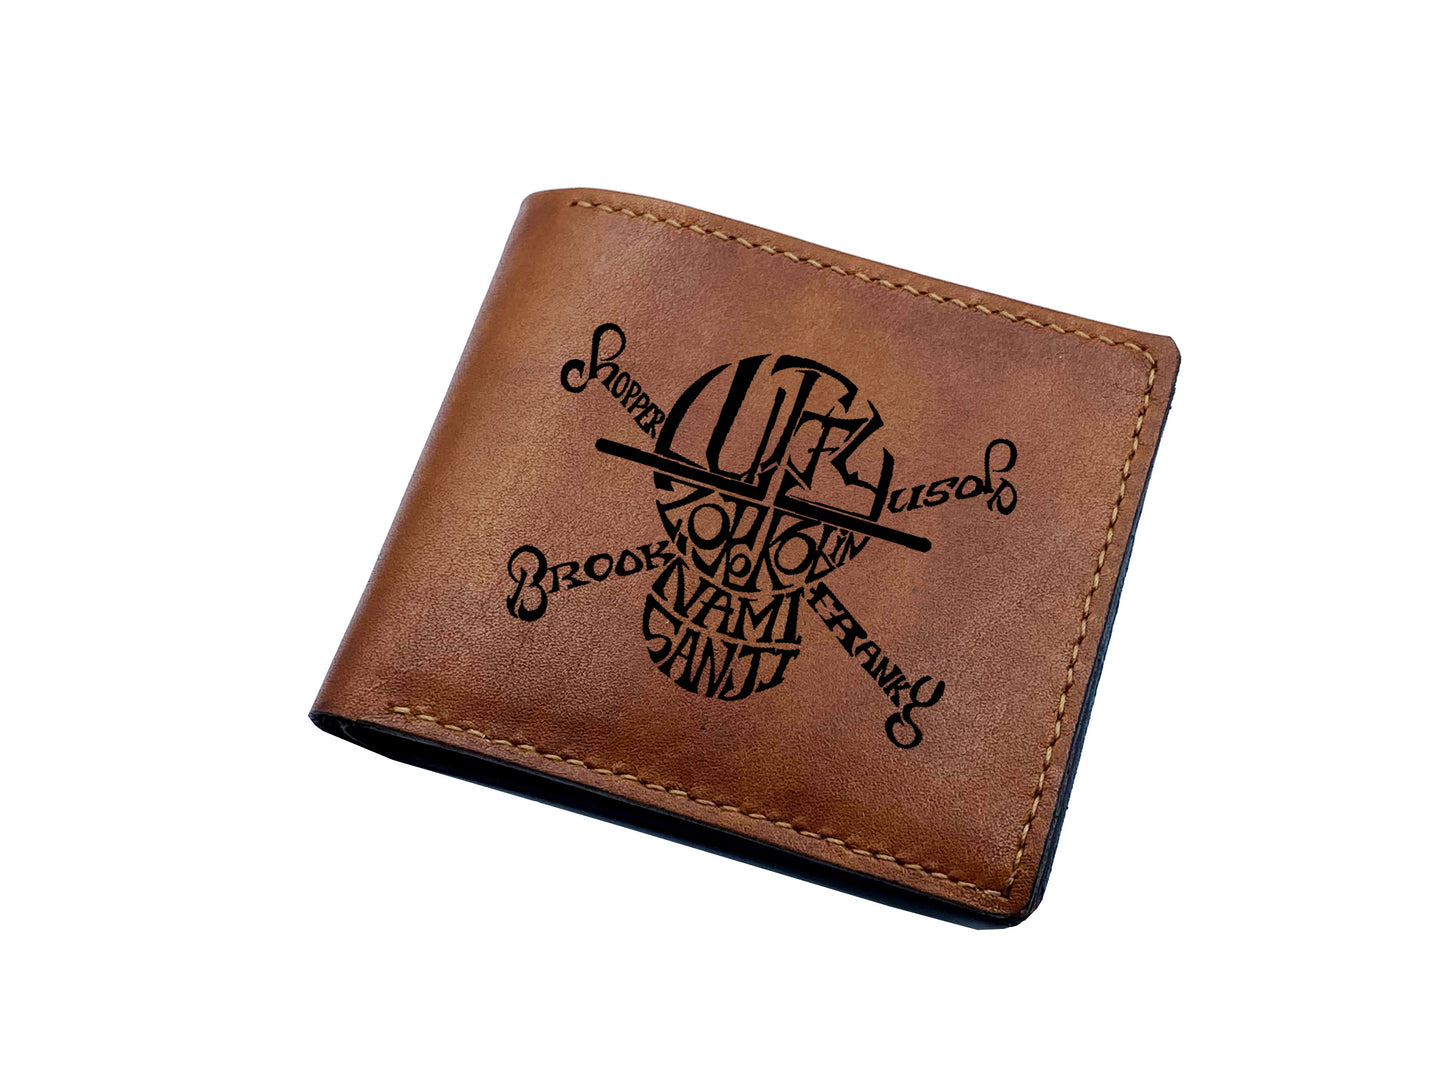 Mayan Corner - Personalized small leather wallet, One Piece Zoro men's wallet, anniversary present for him, christmas gift idea for friend